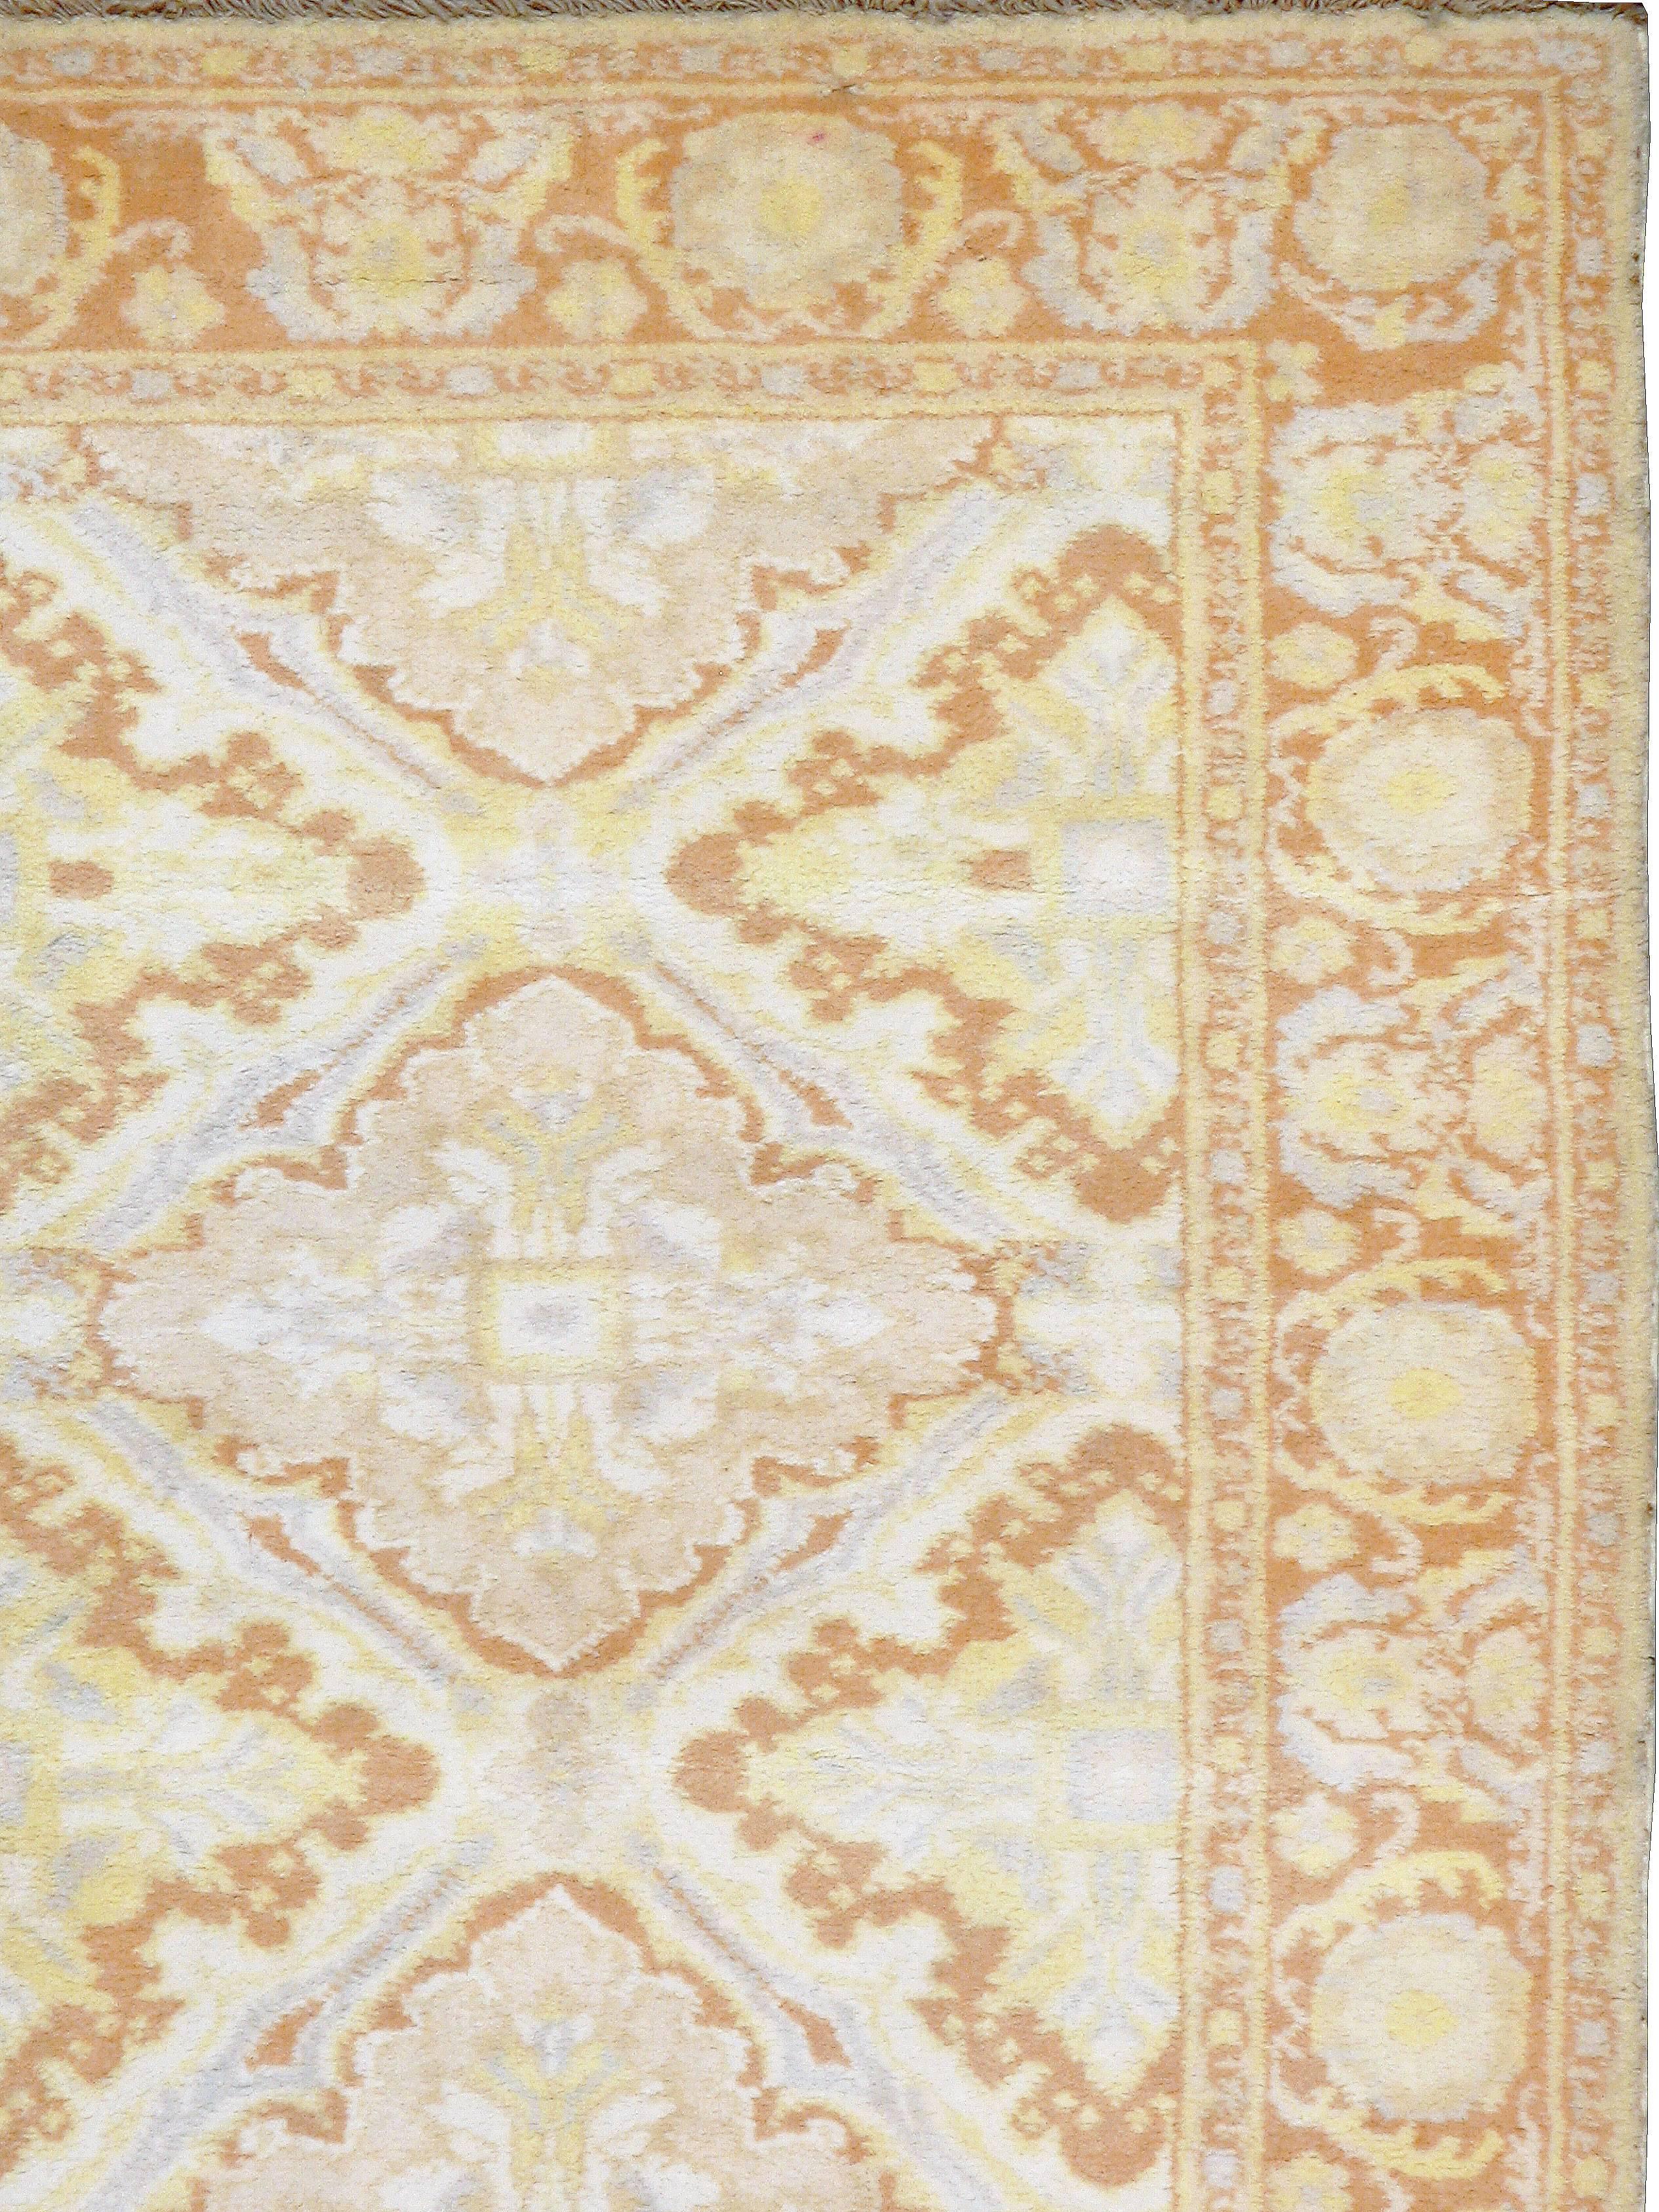 A vintage Indian Cotton Agra carpet from the second quarter of the 20th century.